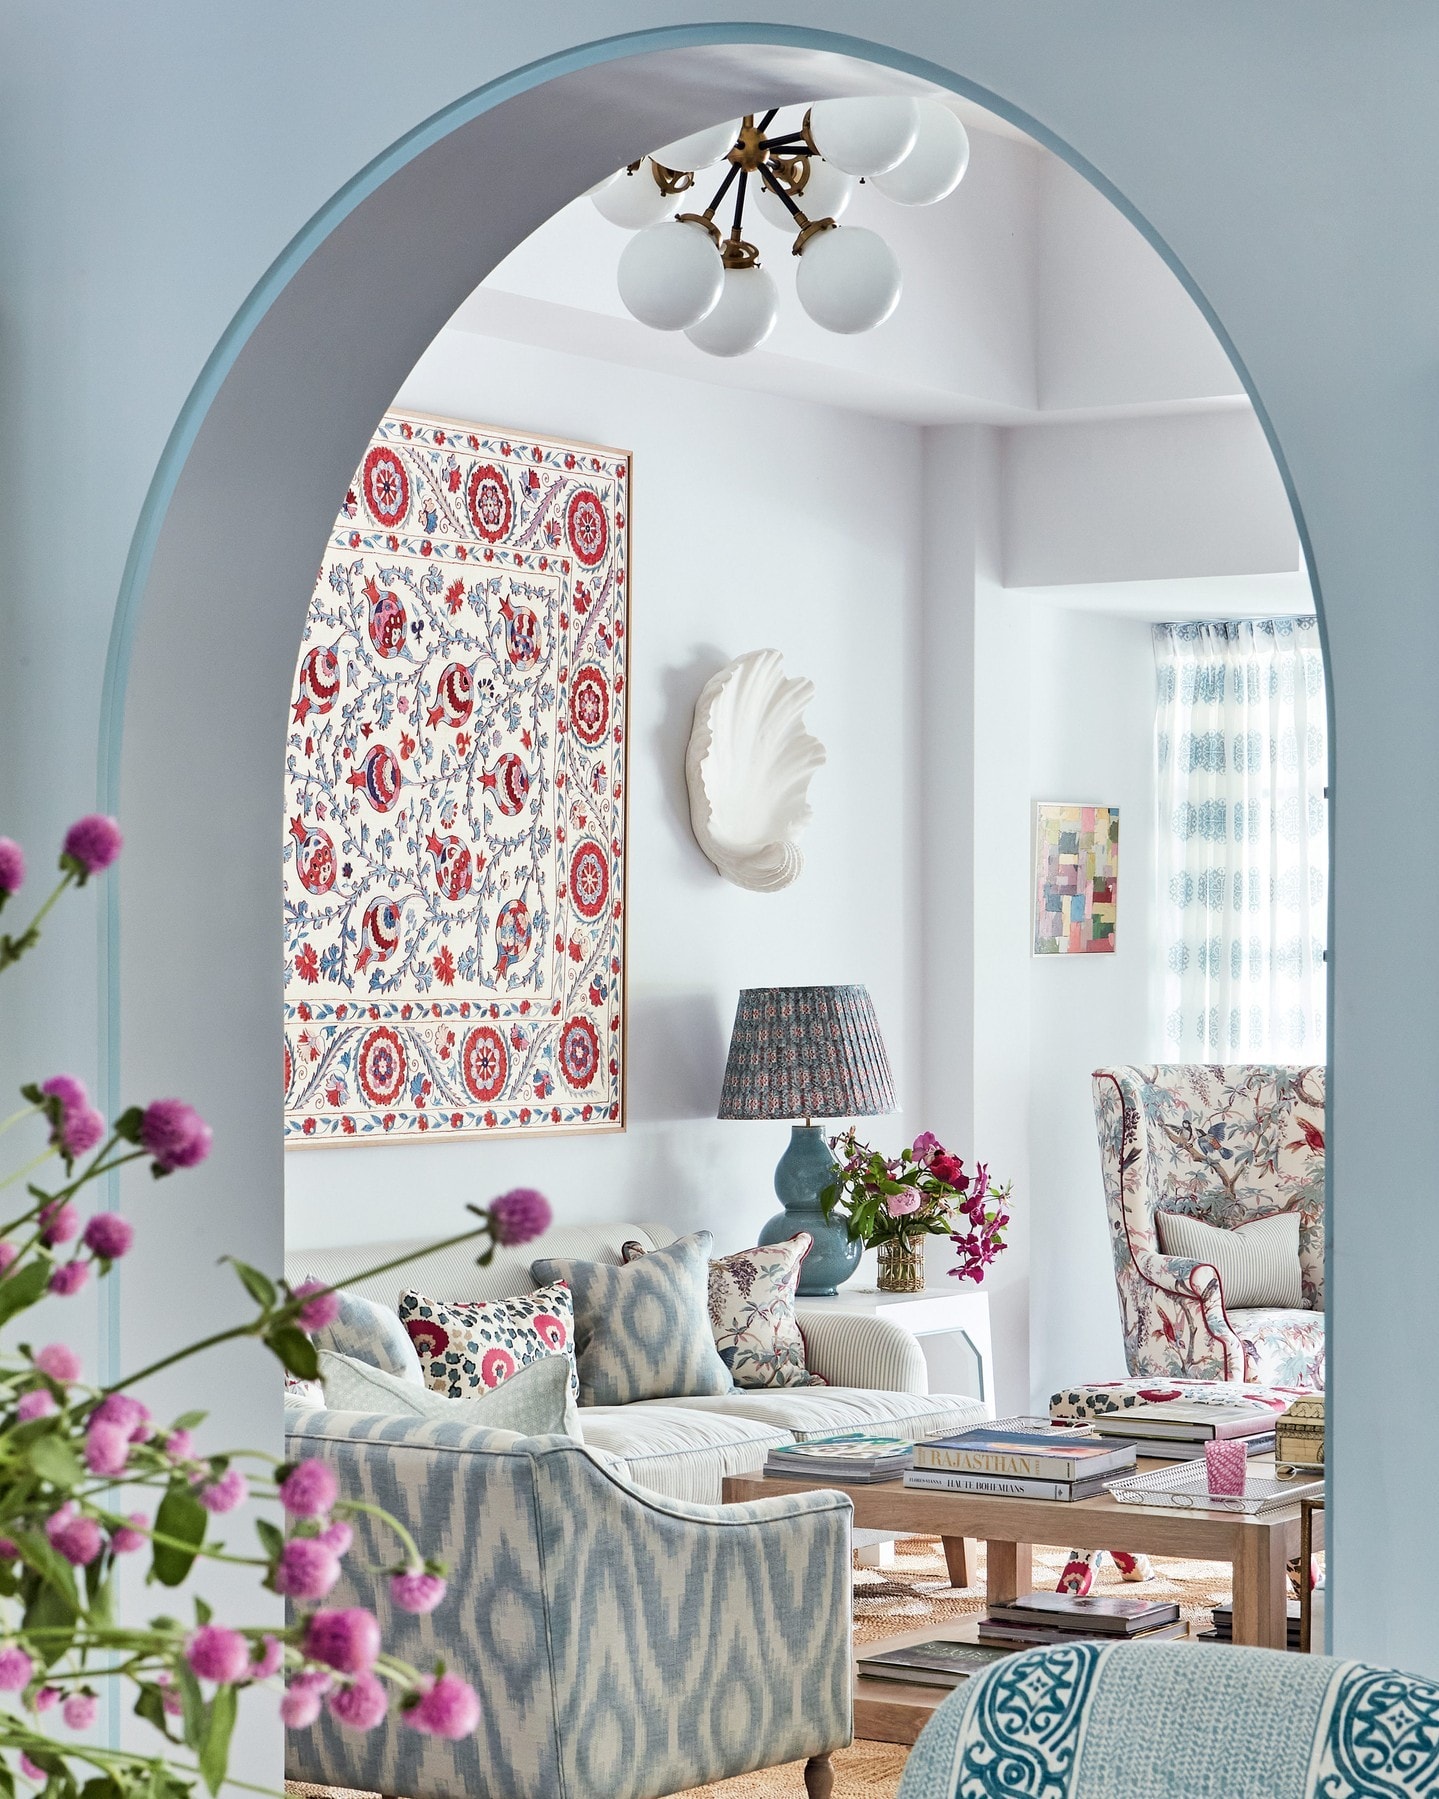 6 Delightful Spring Color Palette Ideas To Infuse In Your Home